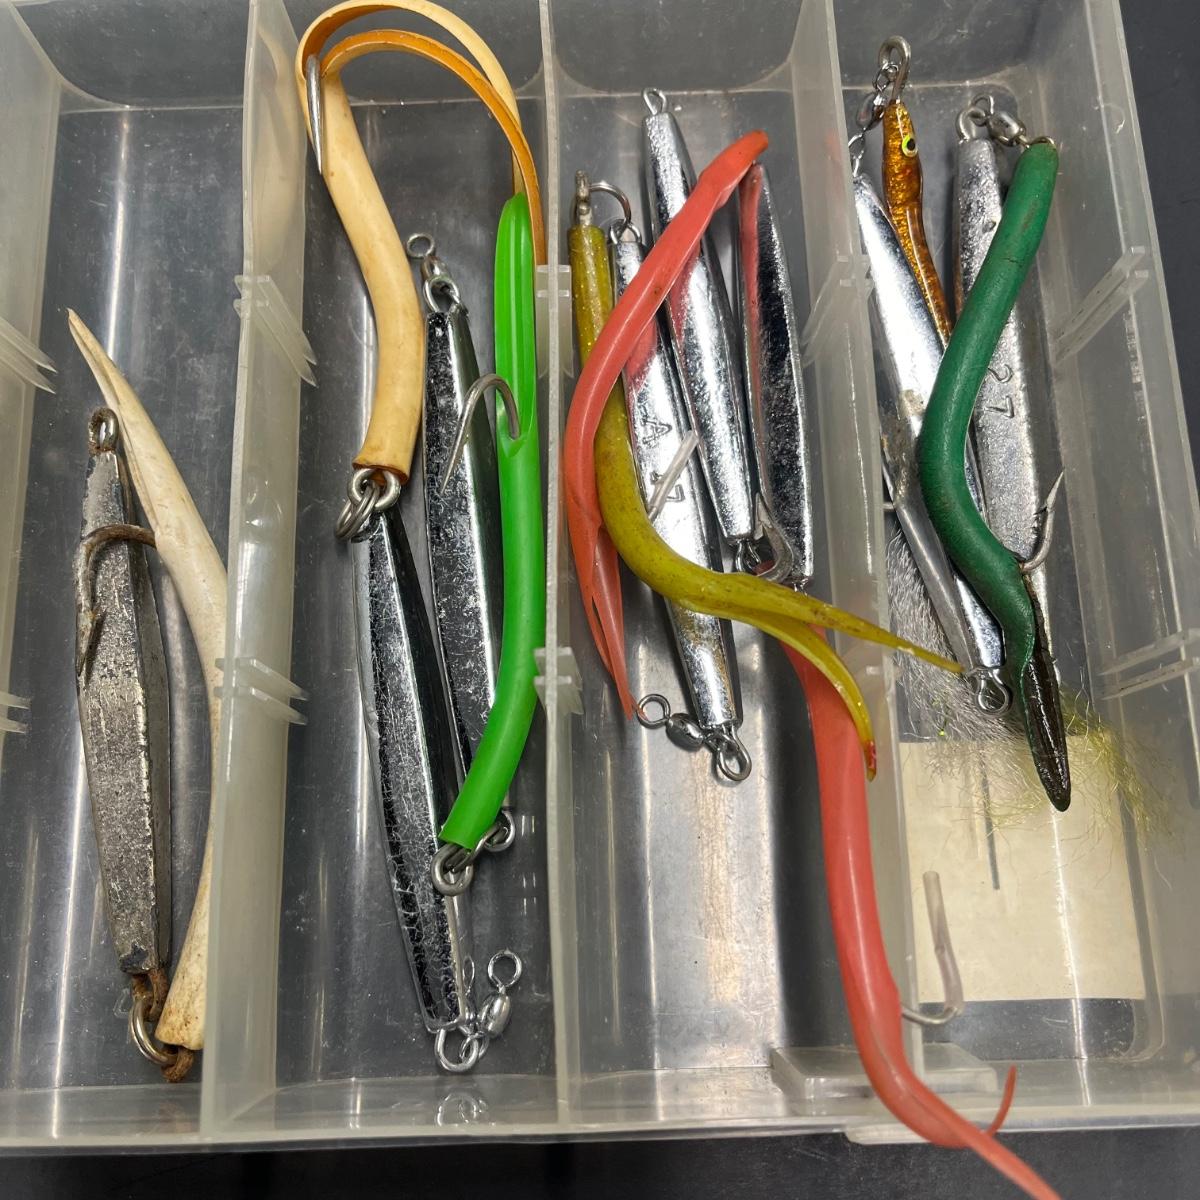 LOT 137B: Assorted Fishing Lures